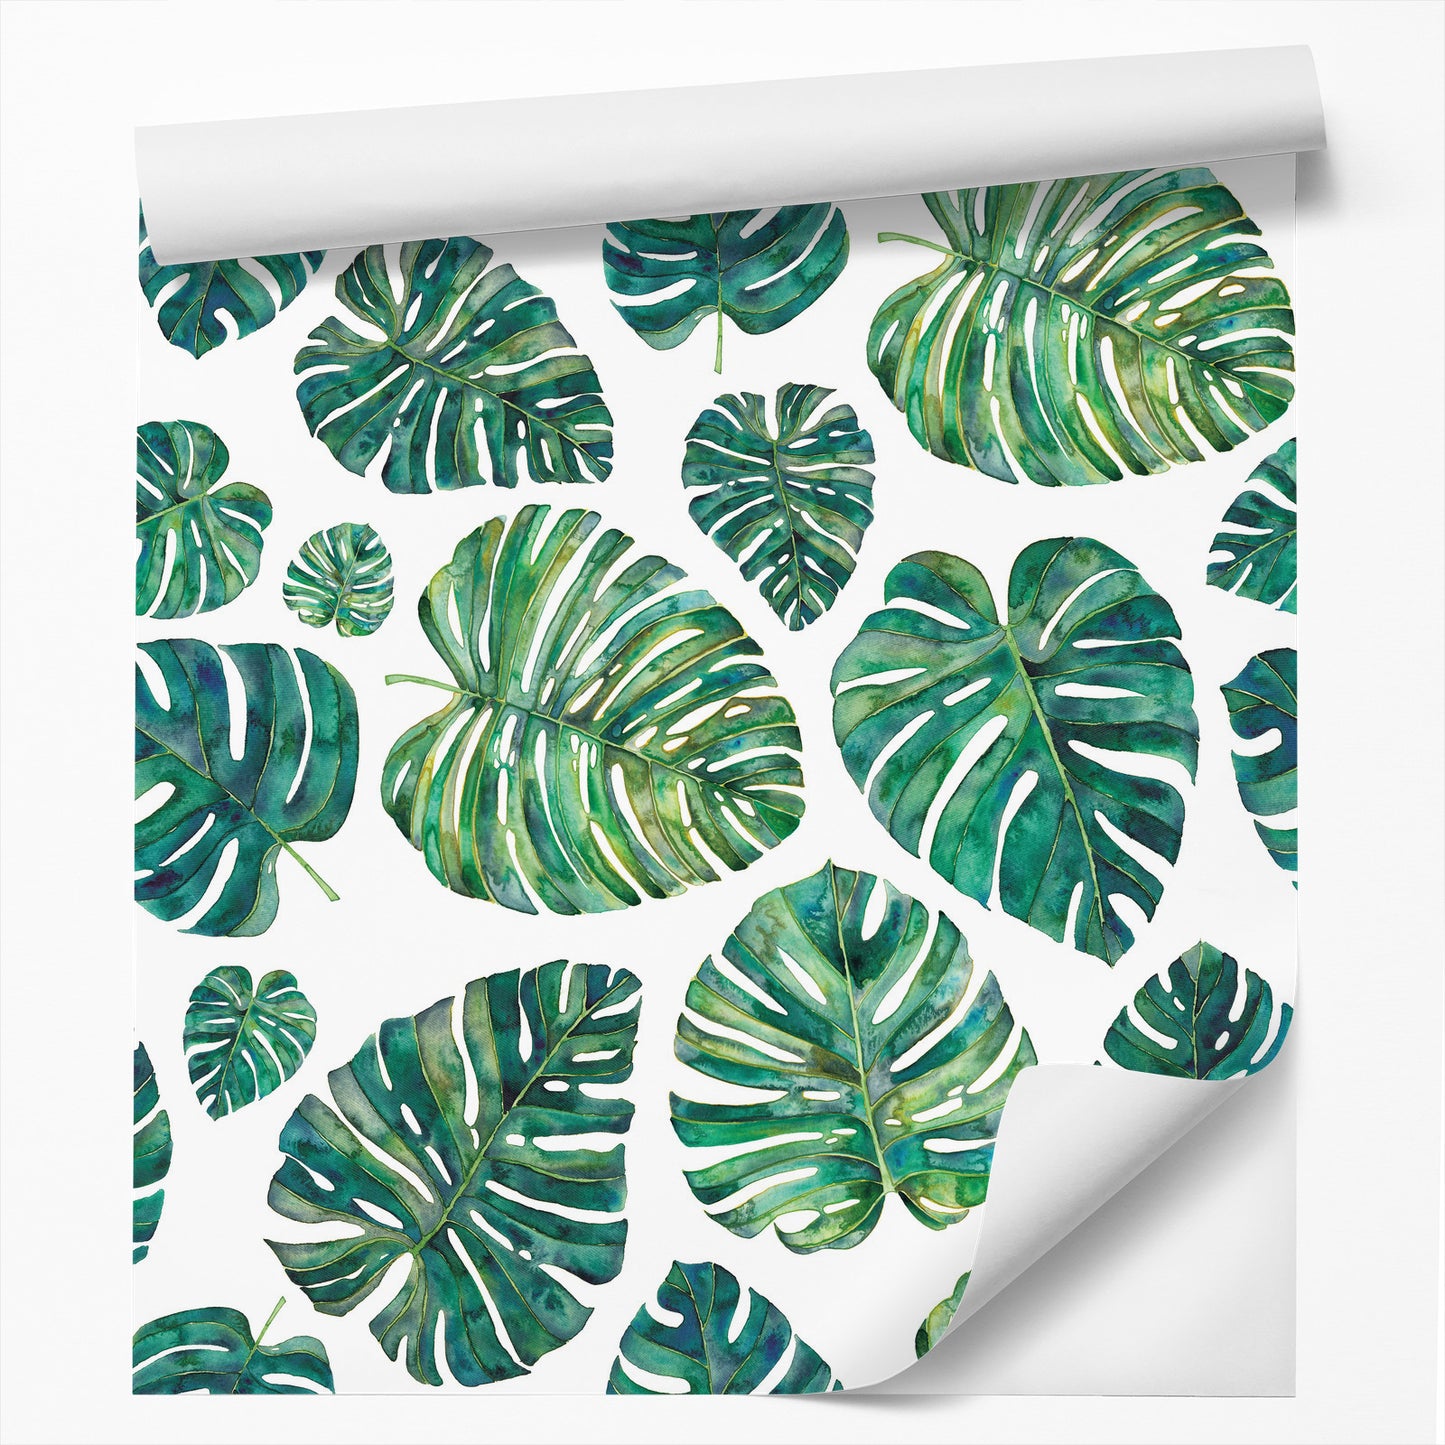 Peel & Stick Wallpaper Roll - Tropical Leaves by Elena ONeill